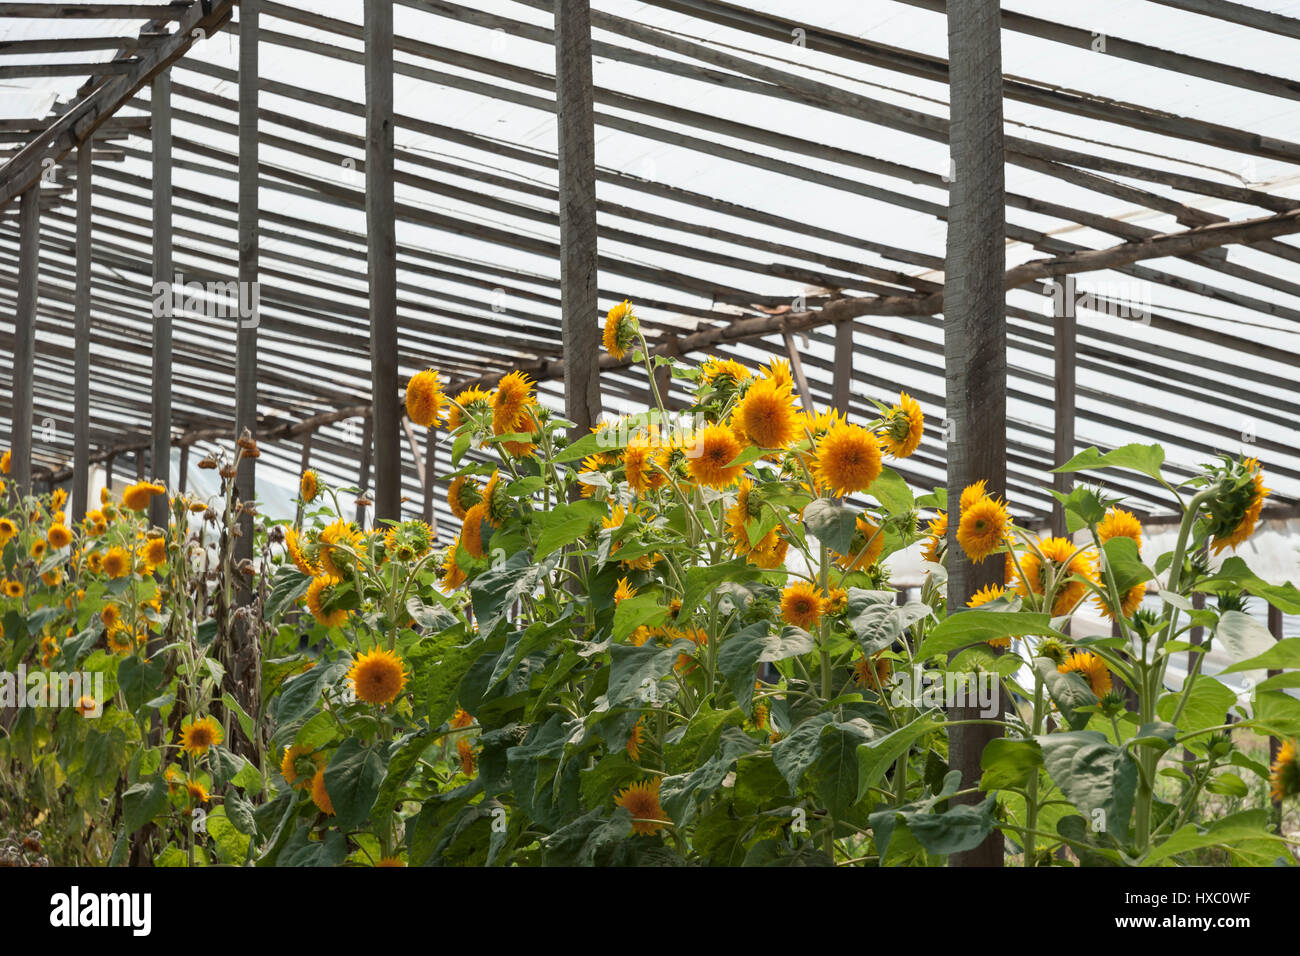 Helianthus annuus 'Teddy Bear' sunflowers growing in a greenhouse Stock Photo